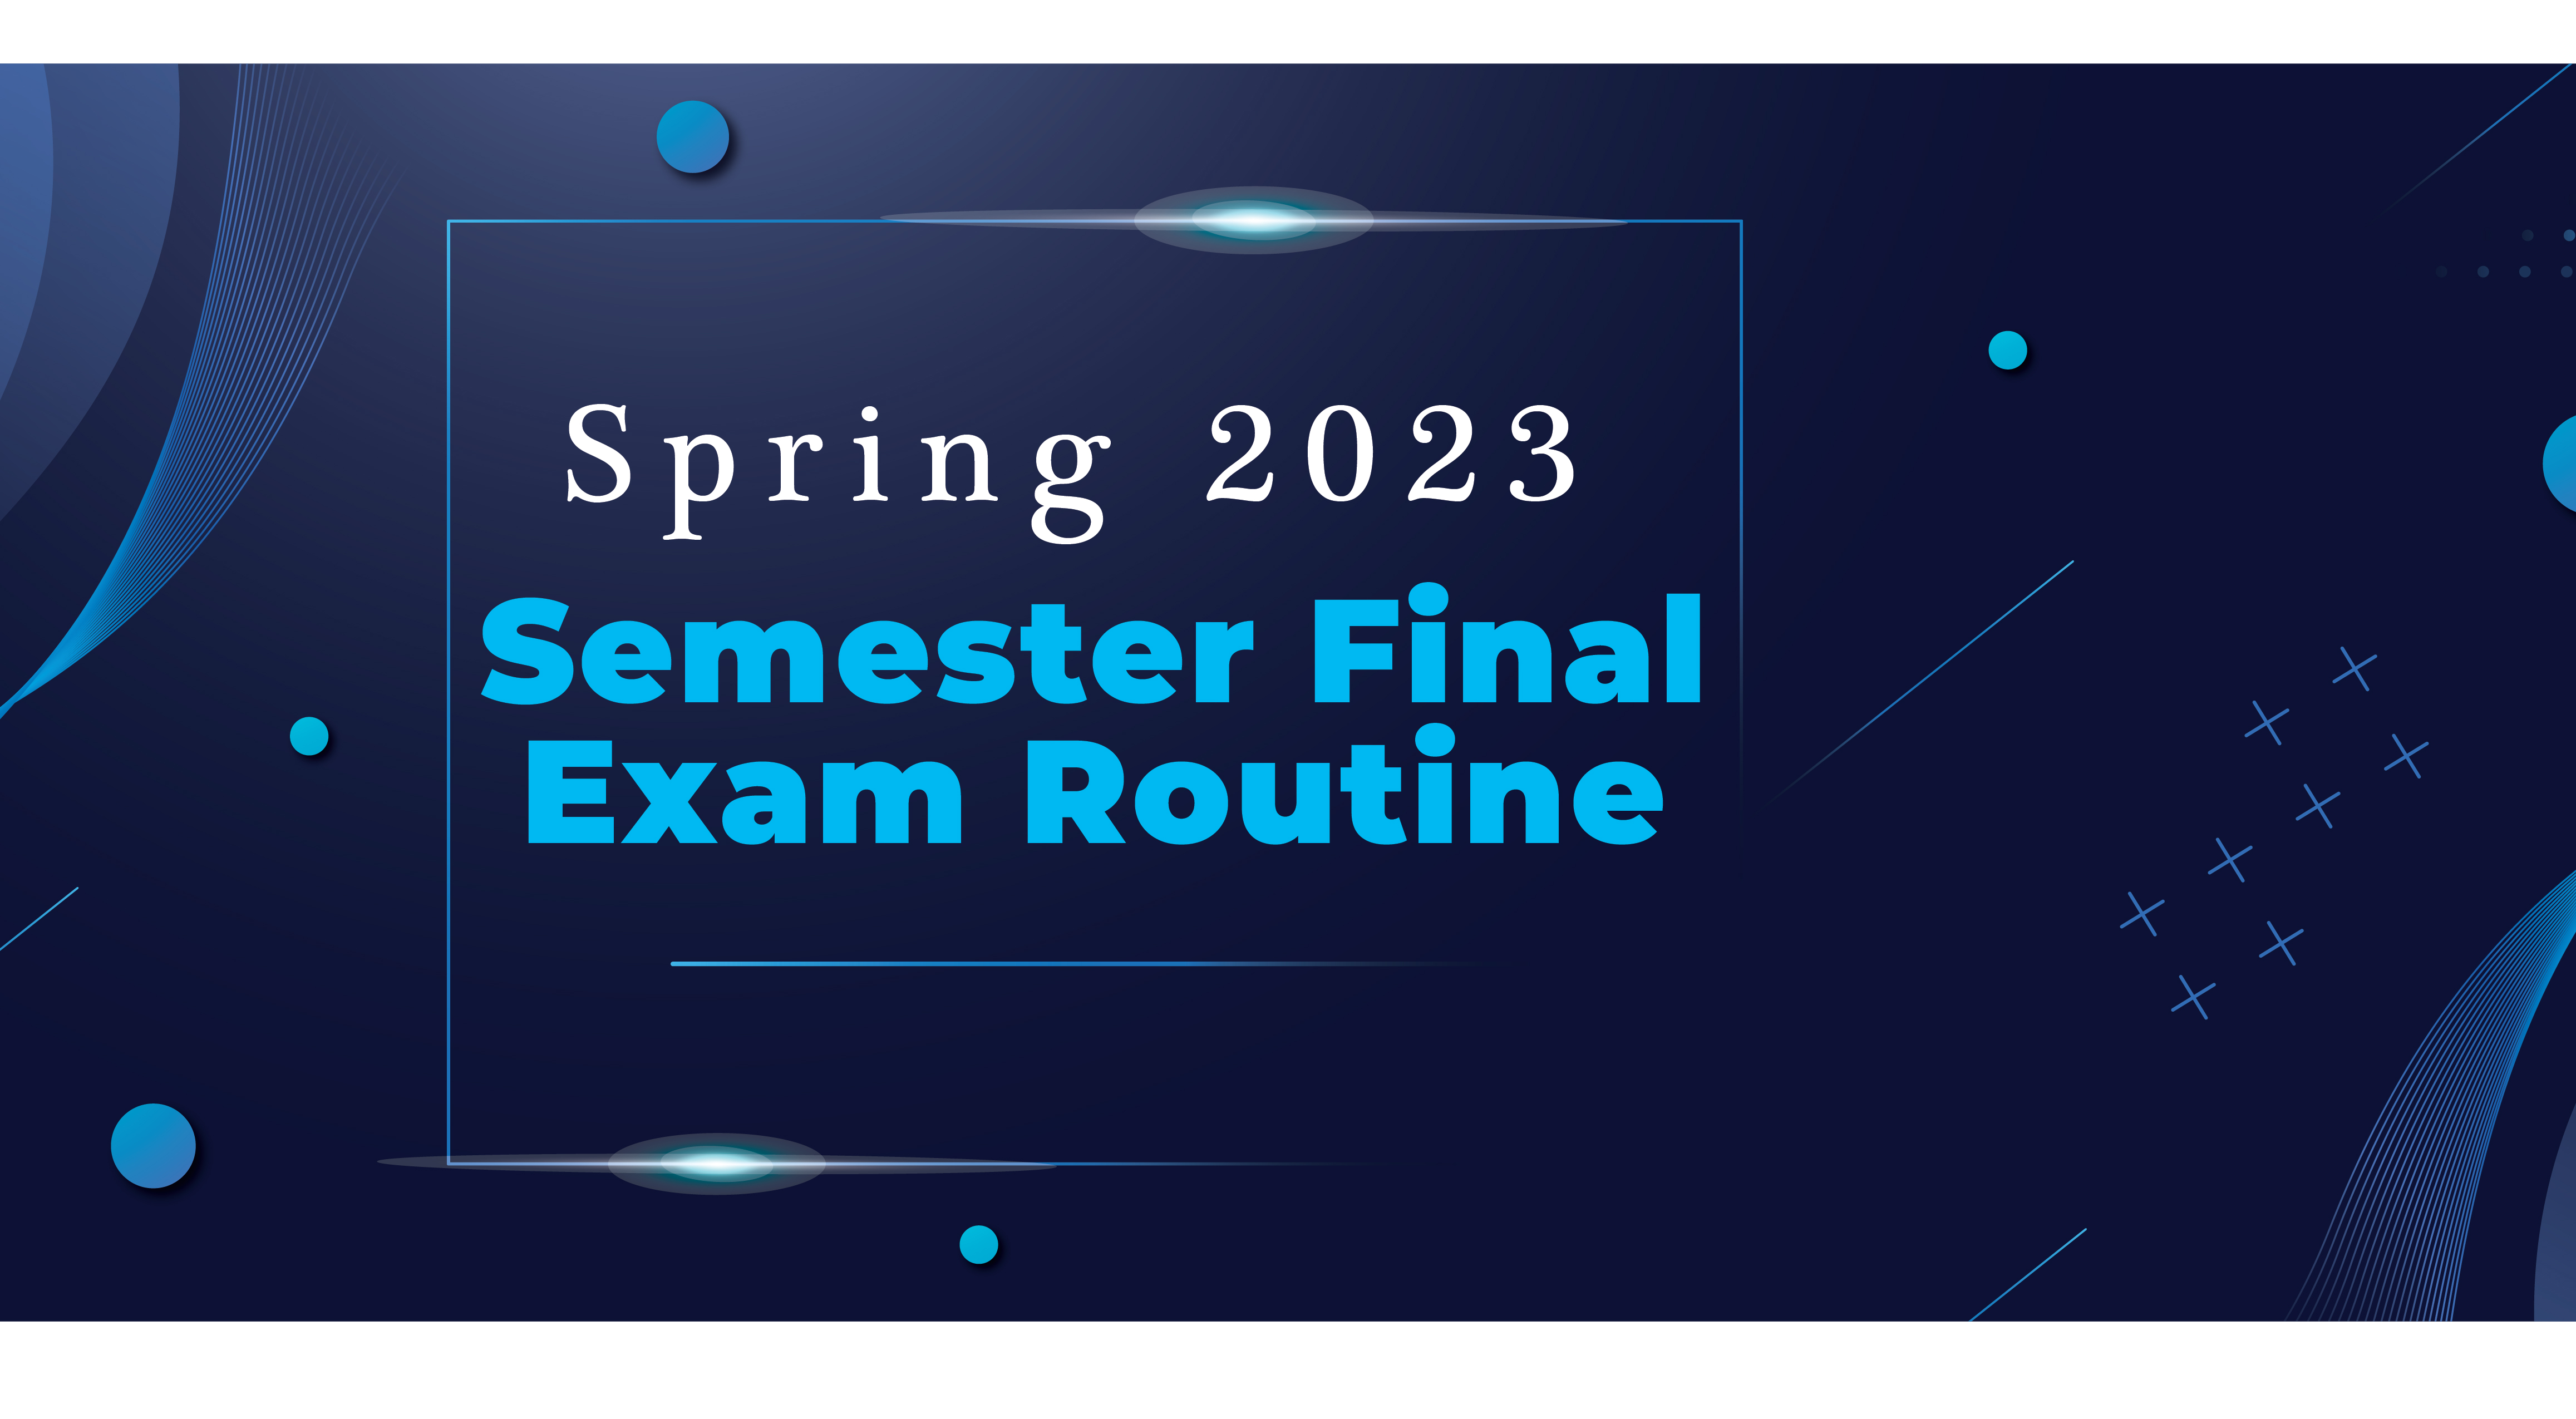 SPRING 2023 SEMESTER FINAL EXAM ROUTINE FOR ENGLISH